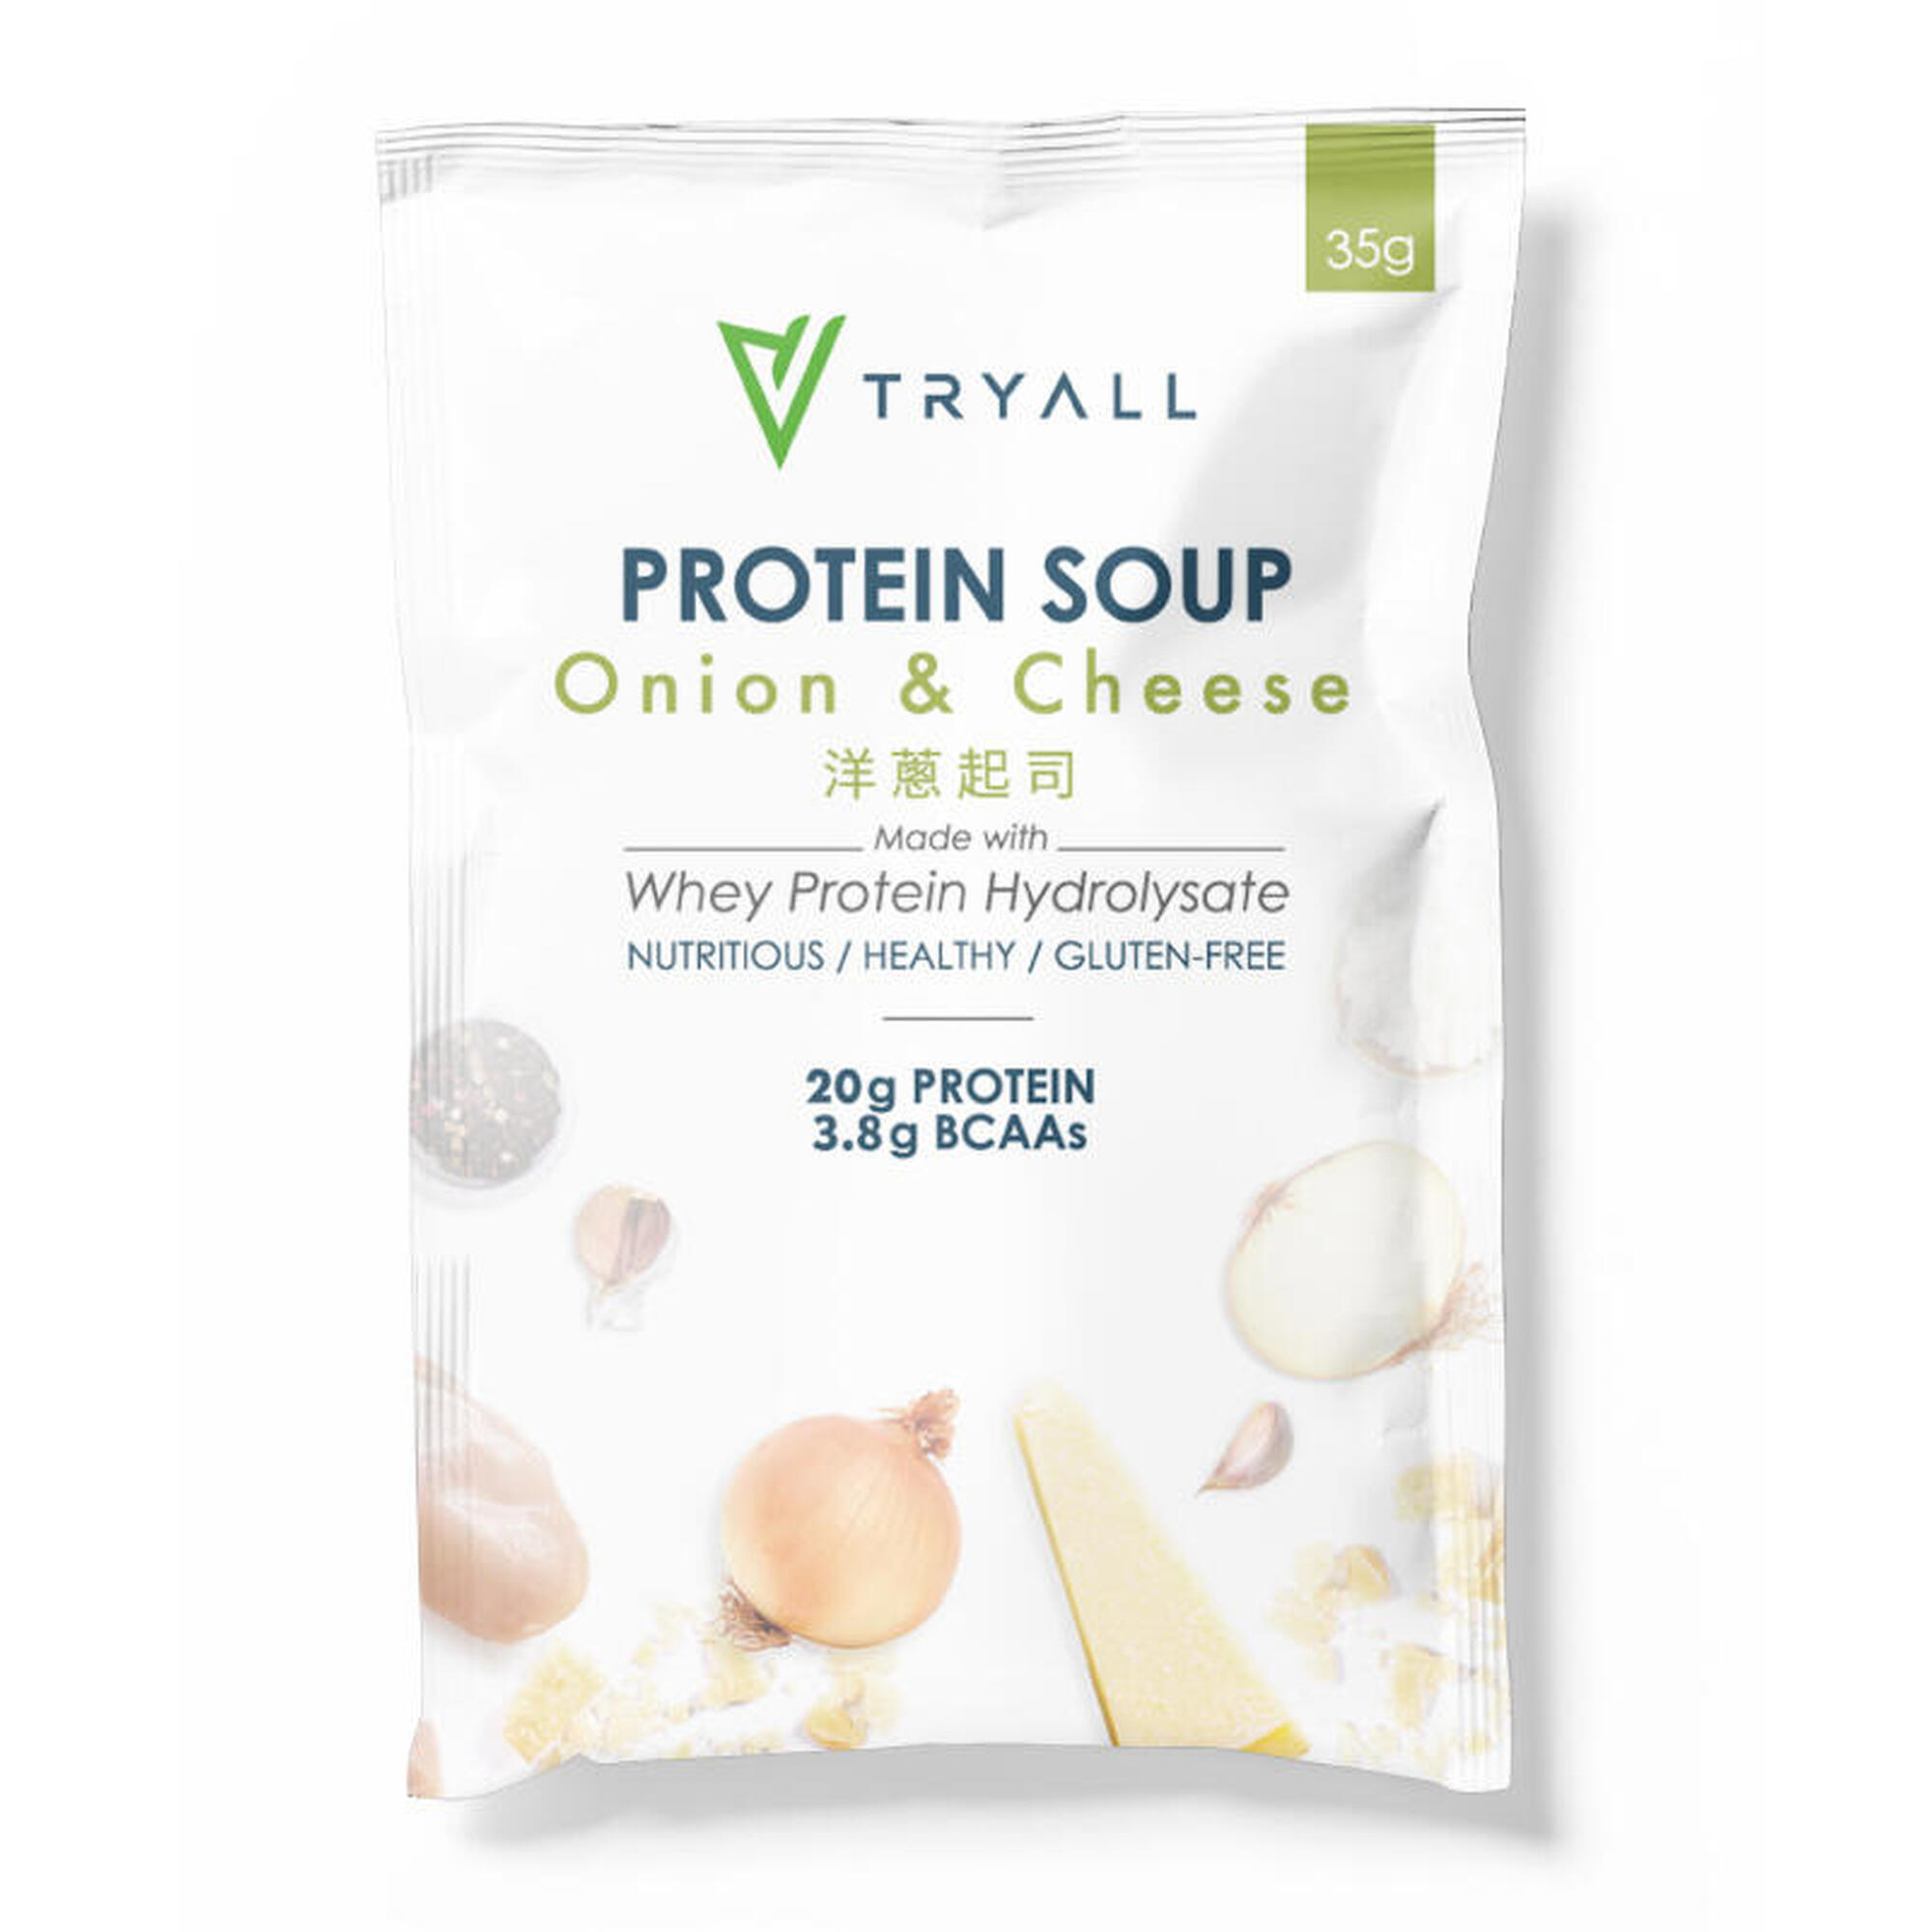 Hydrolysate Protein Soup Sachet (8 packs) - Onion & Cheese